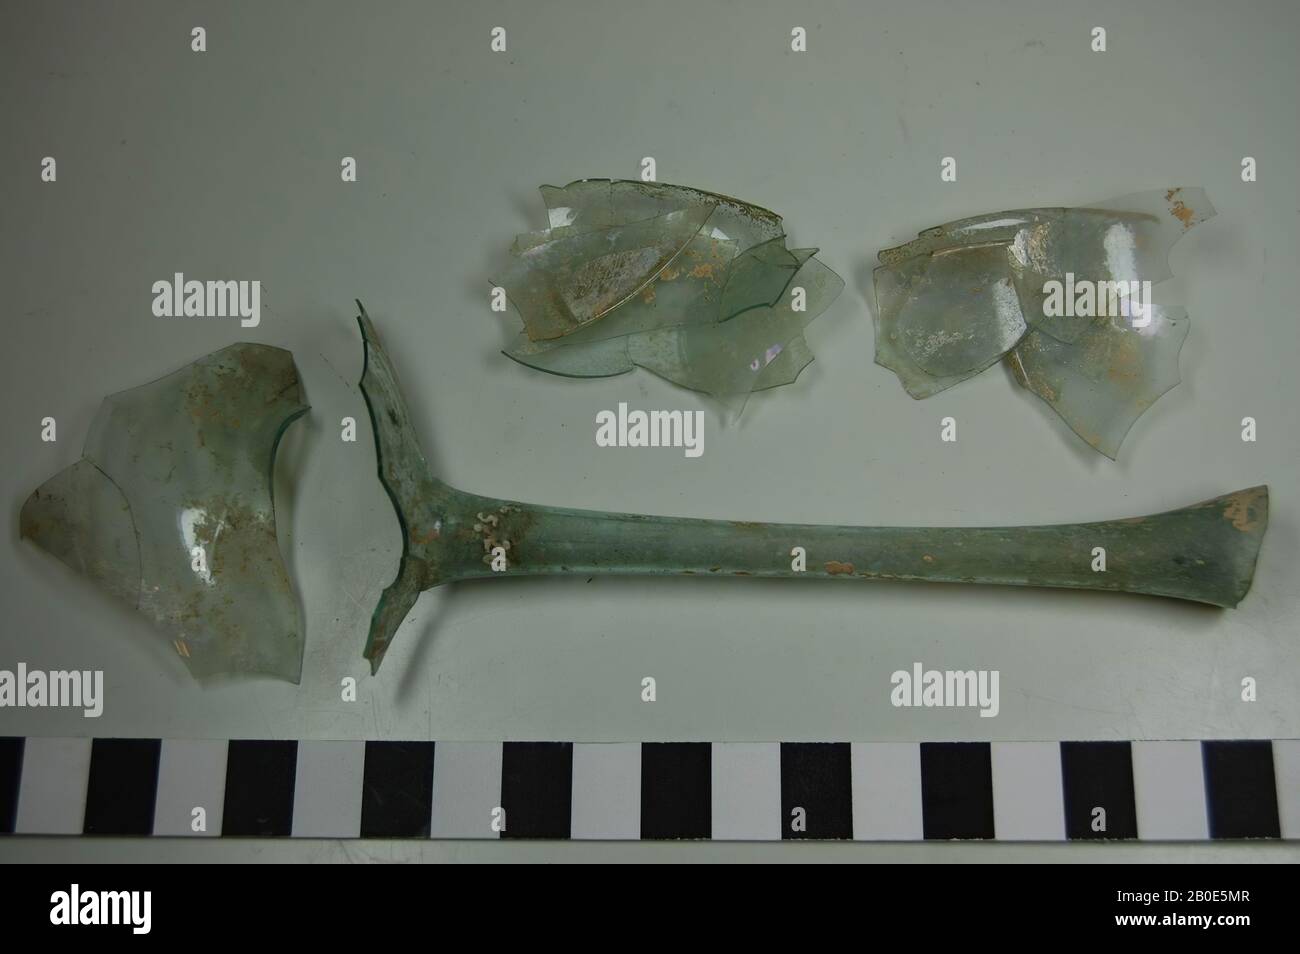 Bottle with long, narrow neck and flat, disc-shaped belly. Broken, crockery, glass, H 14.3 cm, D 8.2 cm, Israel Stock Photo